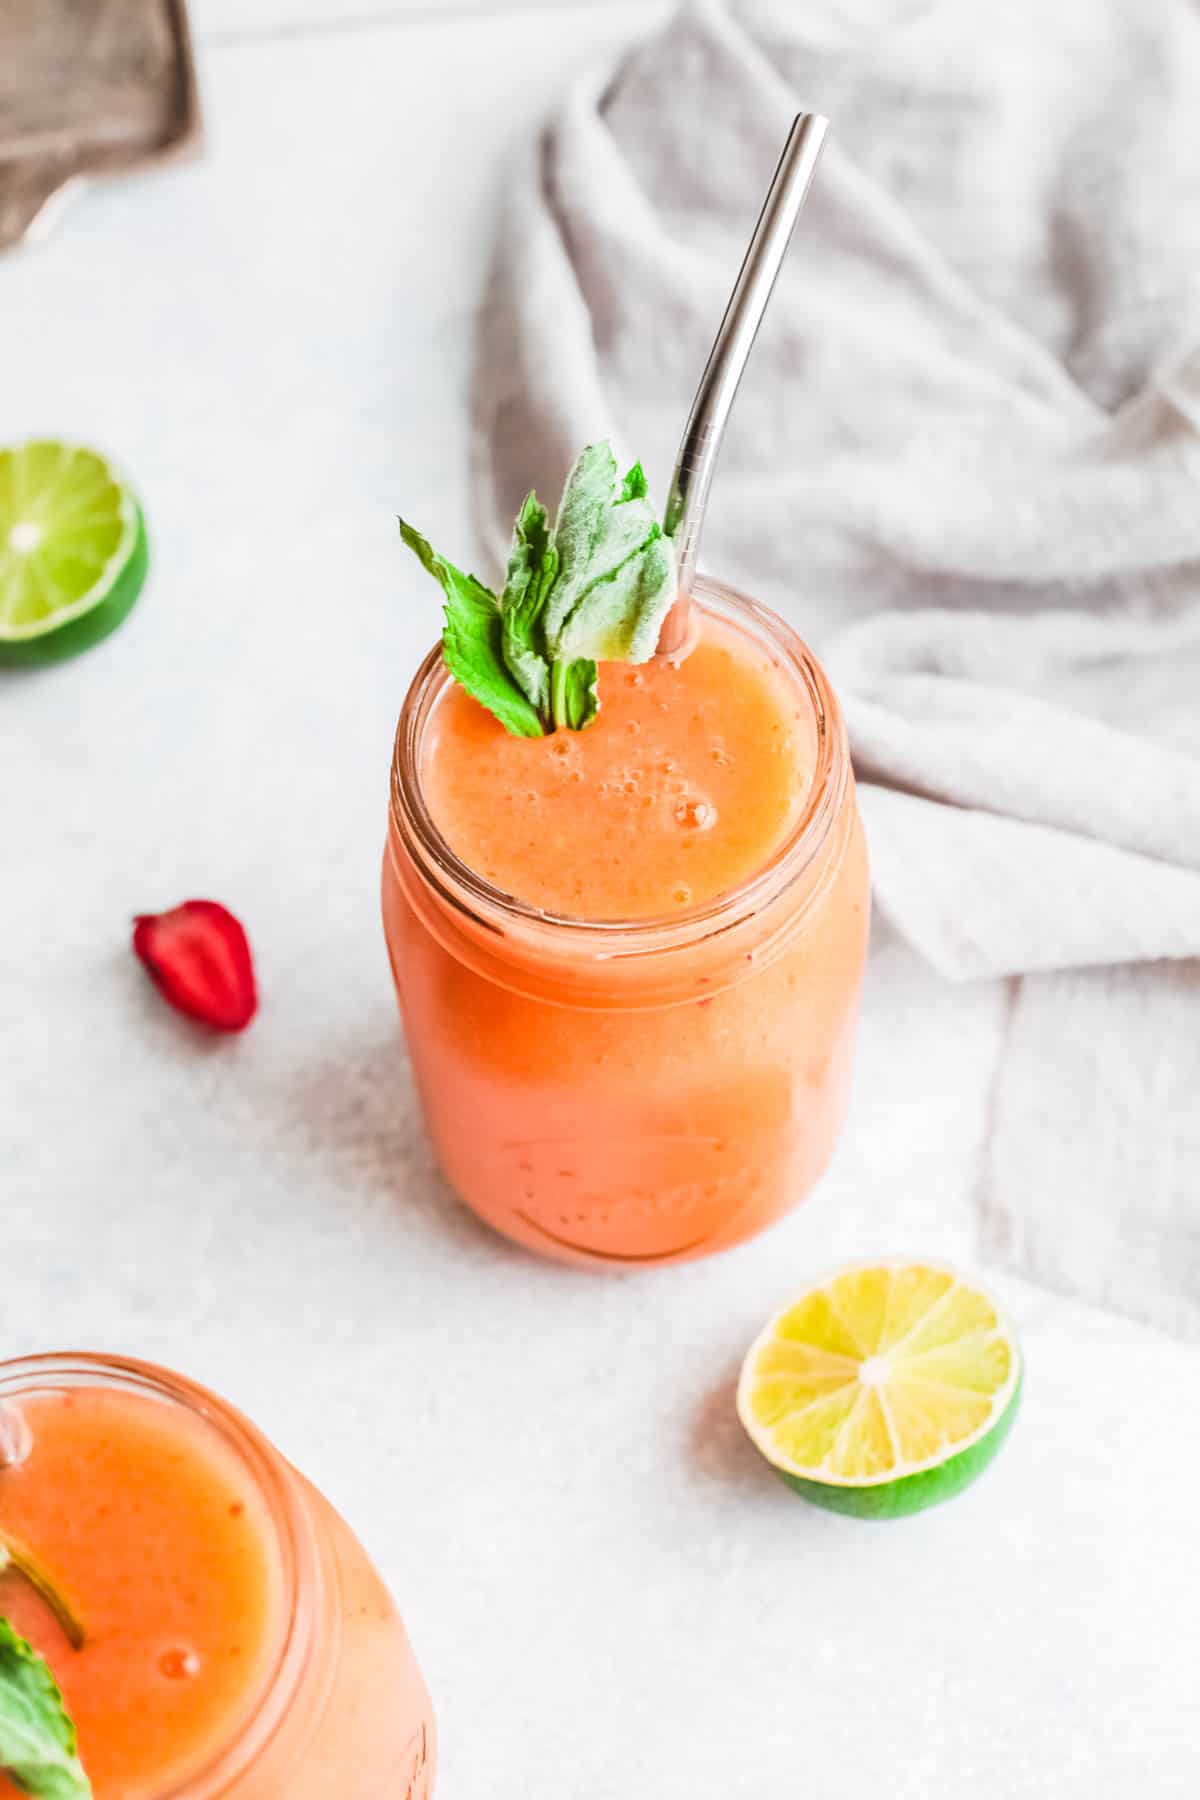 Frozen Strawberry Mango Daiquiri in a jar garnished with mint and a metal straw.